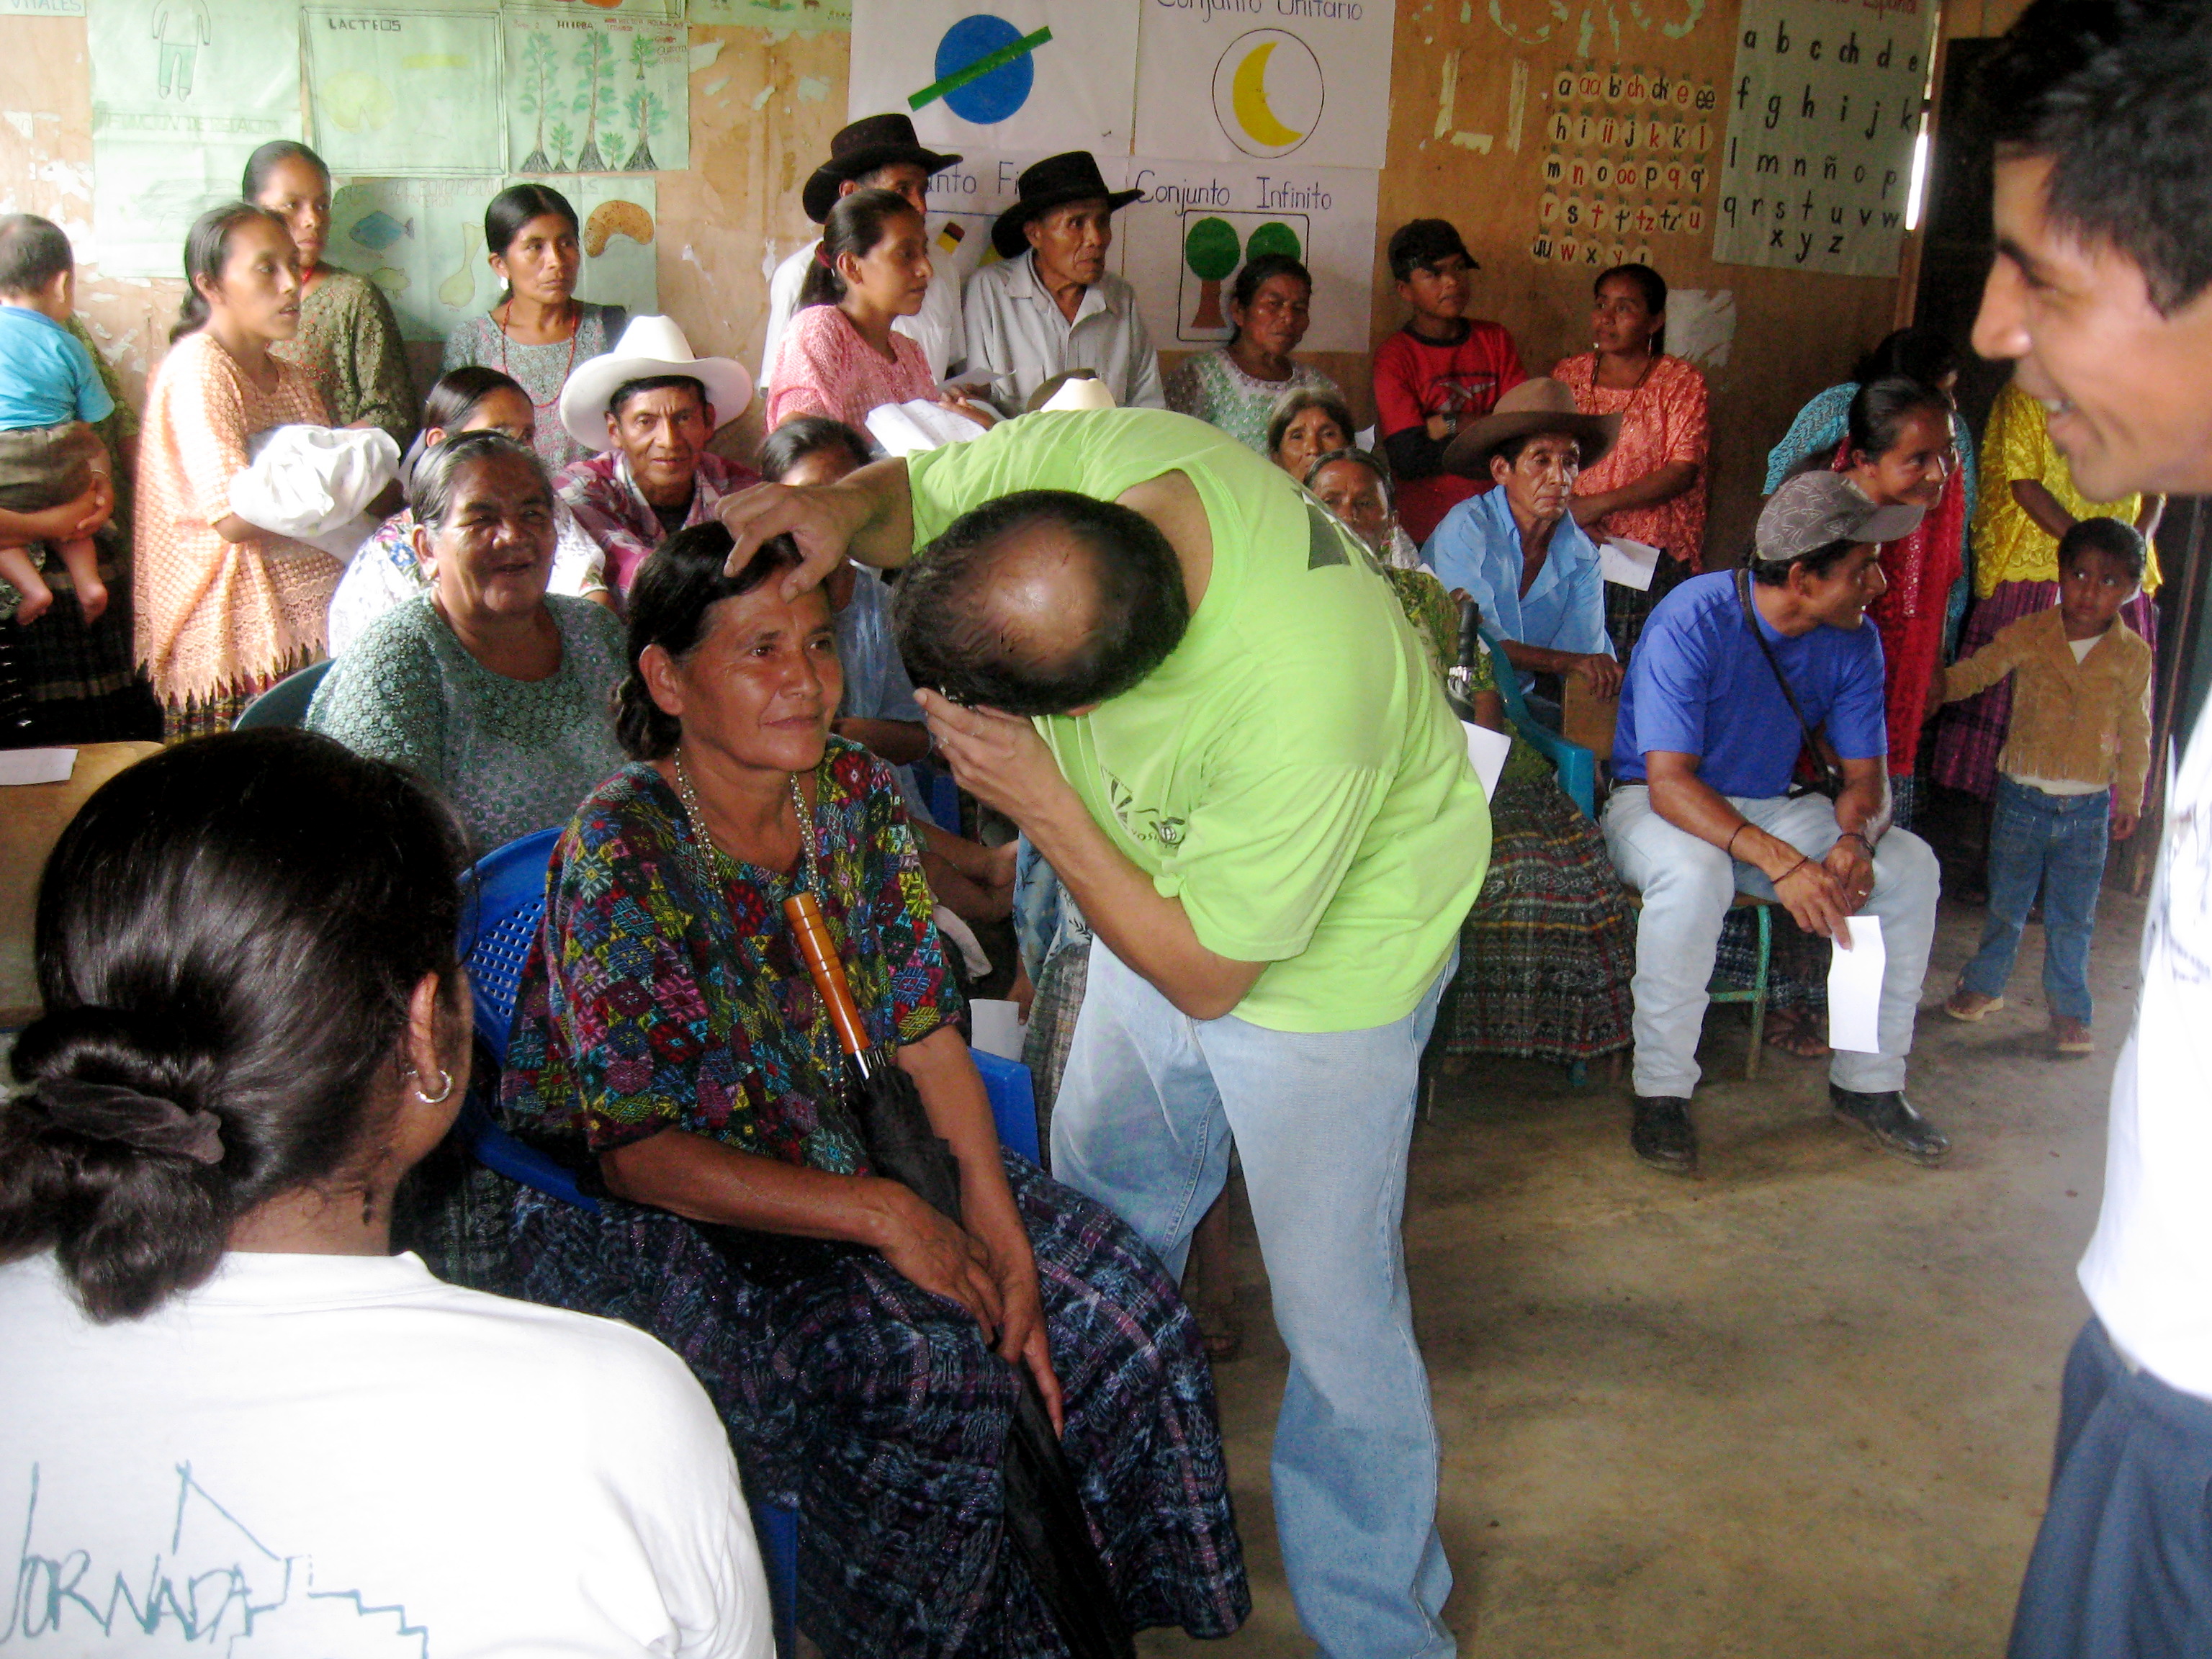 Guatemalan ophthalmologists examine patients at the Seva eye camp in the mountainous central region of Guatemala. Photo by Laura Spencer